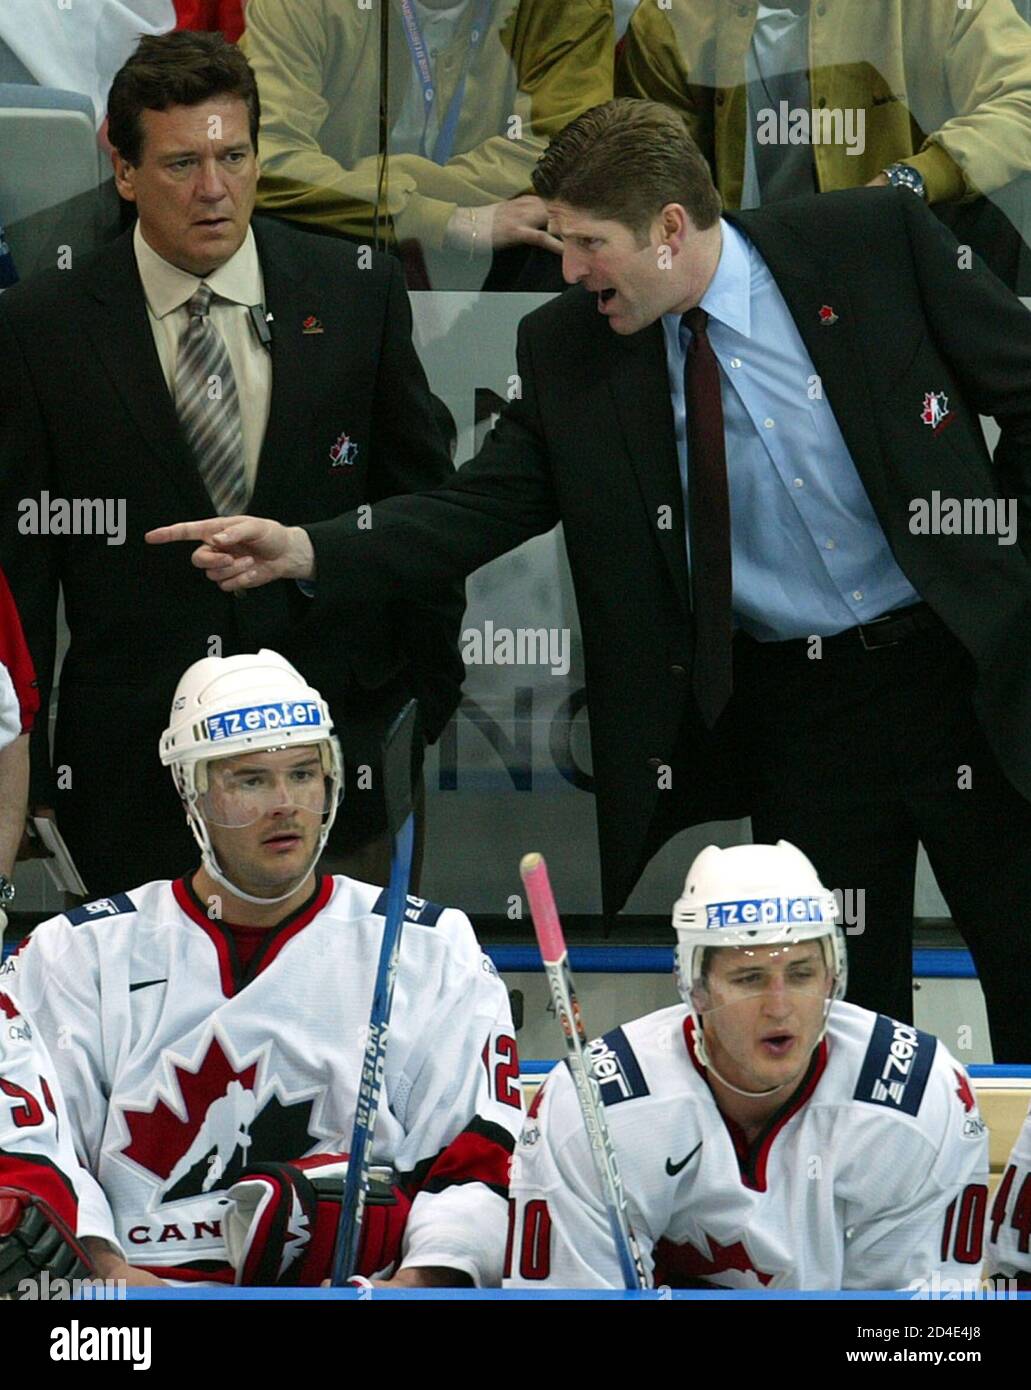 NEW CANADIAN HEAD COACH BABCOACK DIRECTS HIS TEAM ON THE BENCH DURING THEIR  PRELIMINARY ROUND MATCH AGAINST AUSTRIA AT WORLD ICE HOCKEY CHAMPIONSHIP P.  New Canadian head coach Michael Babcoack (top R)